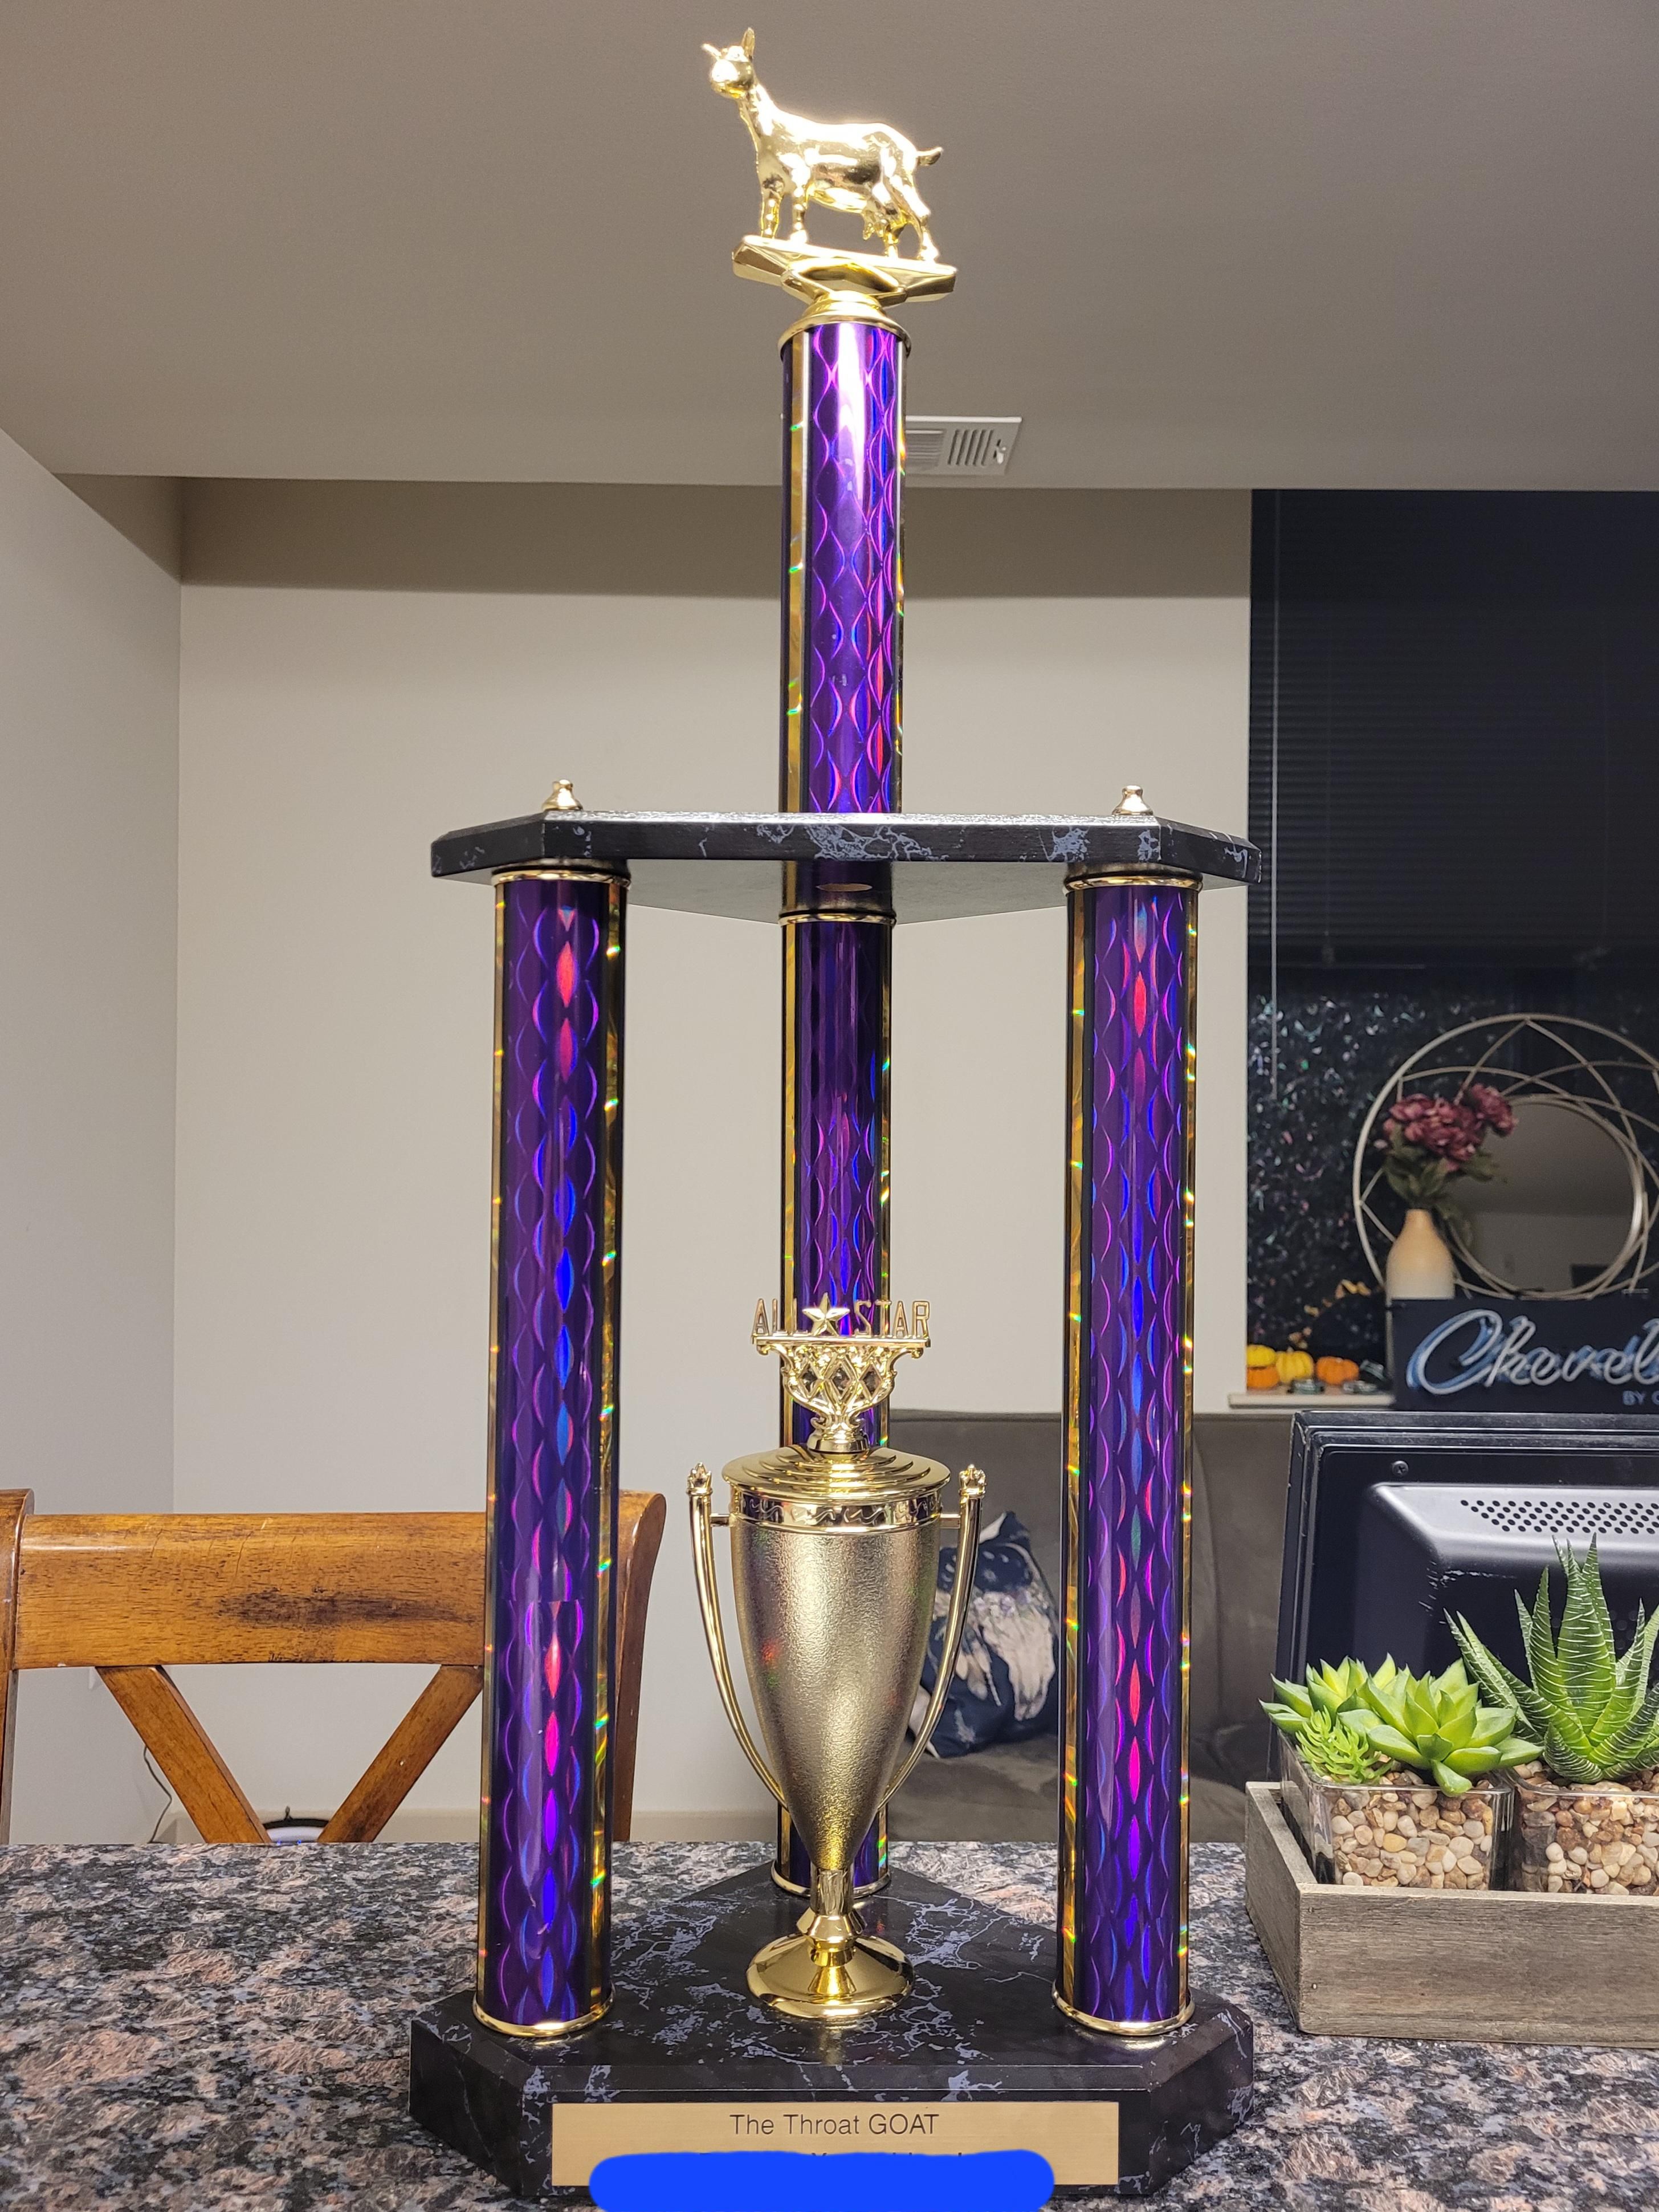 I told my husband I'd never won a trophy, so he got this made for me.